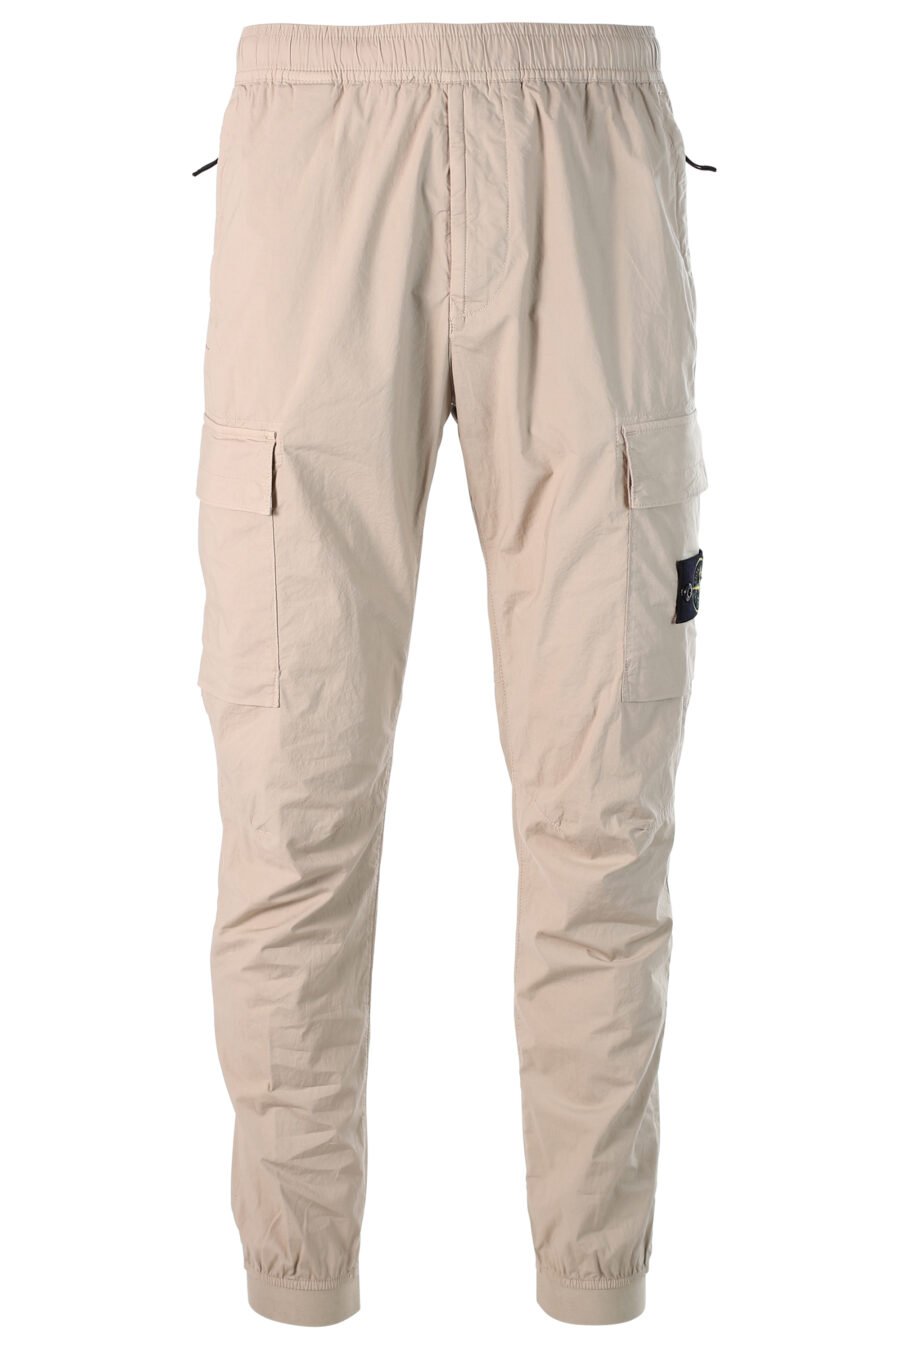 Beige cargo style trousers with patch - 8052572528552